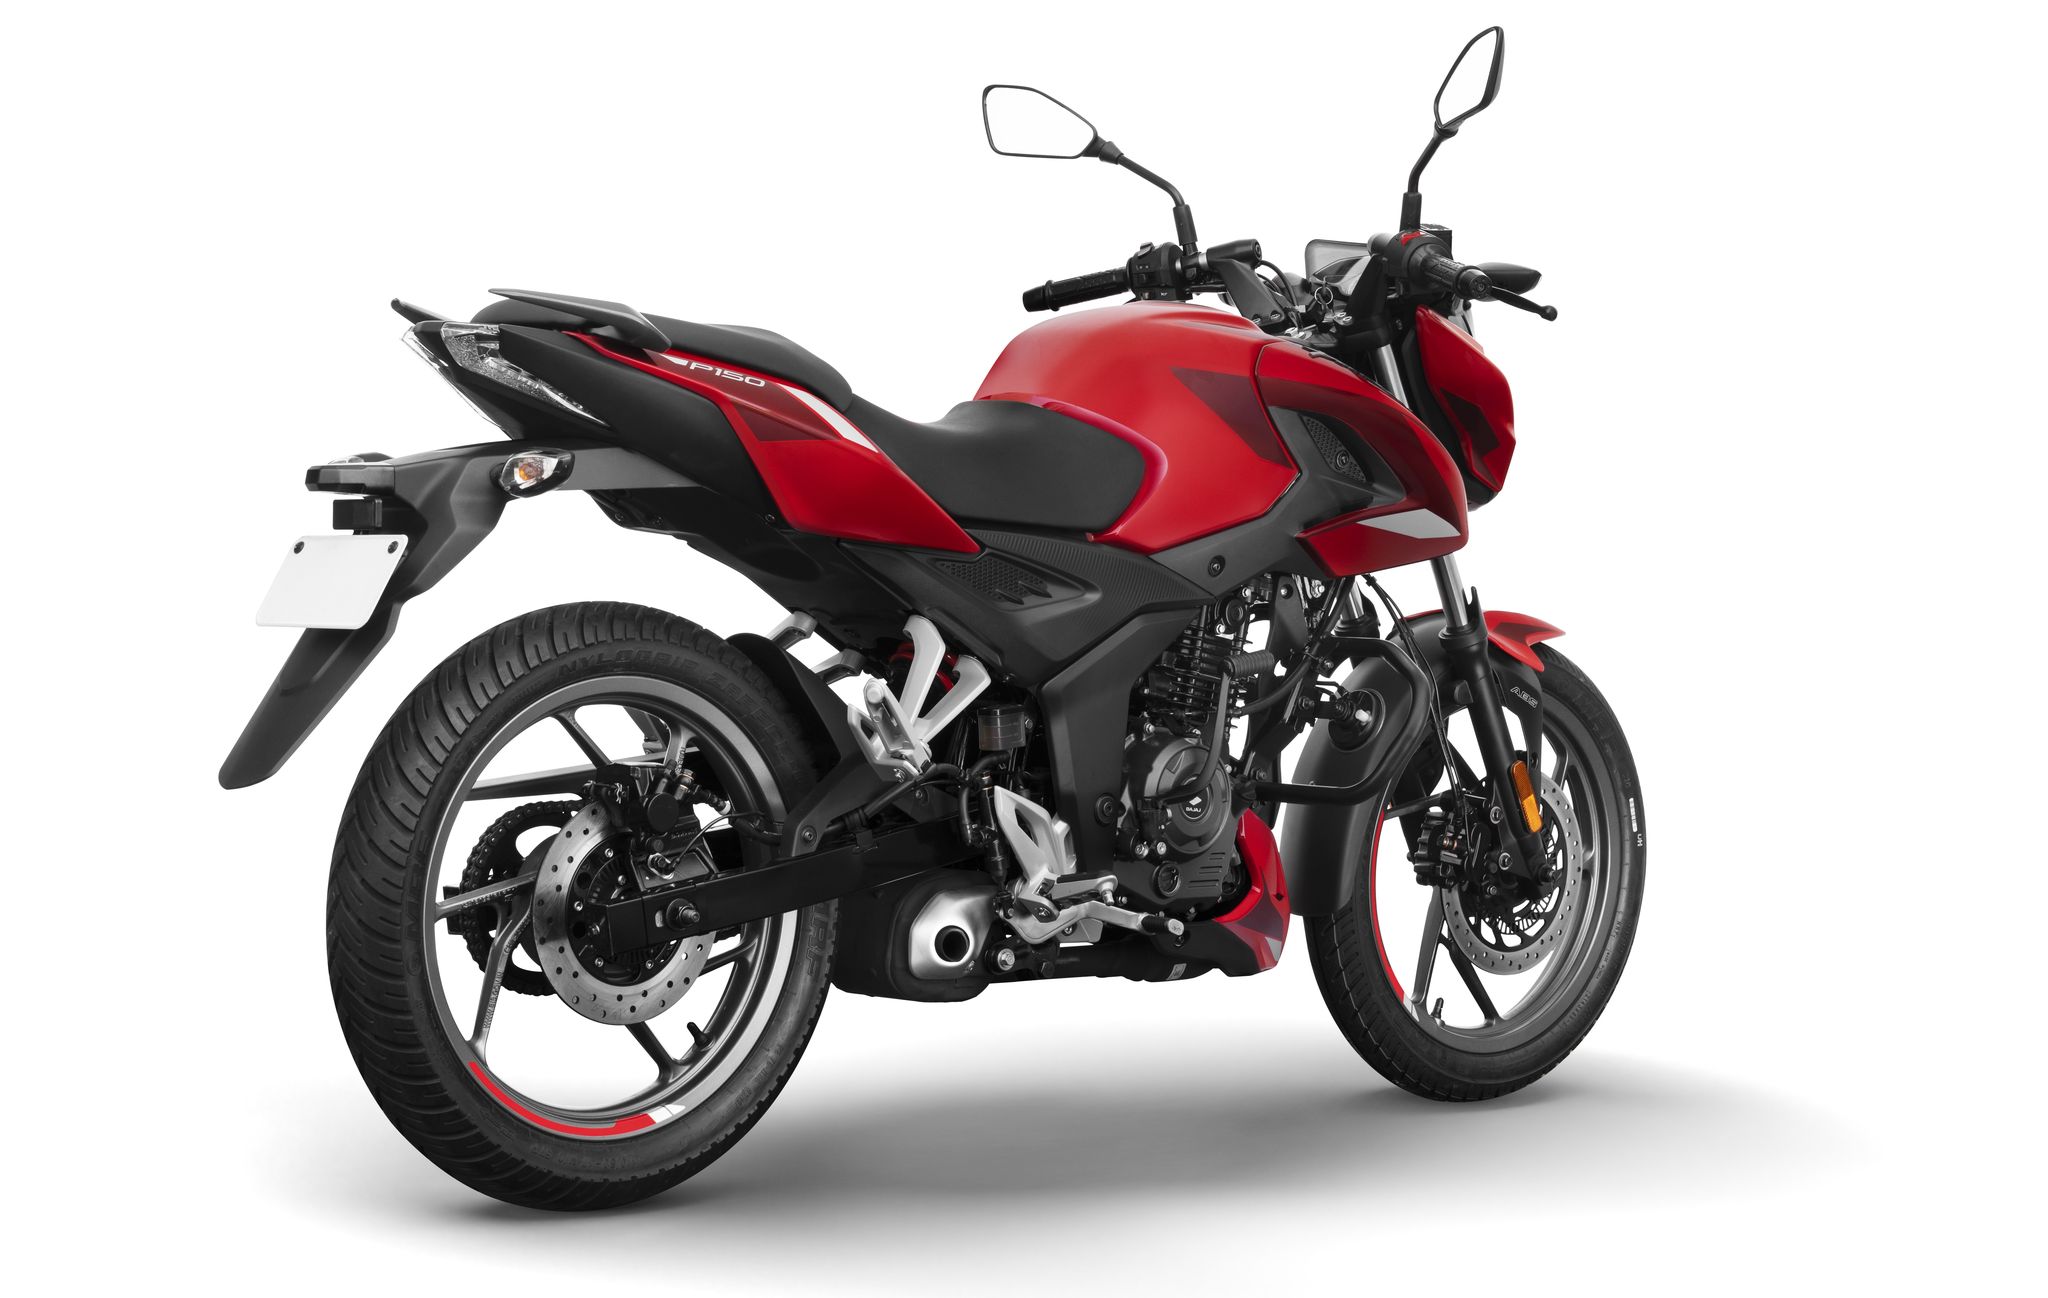 OPINION: New Pulsar P150 - 5 Questions We Try To Answer